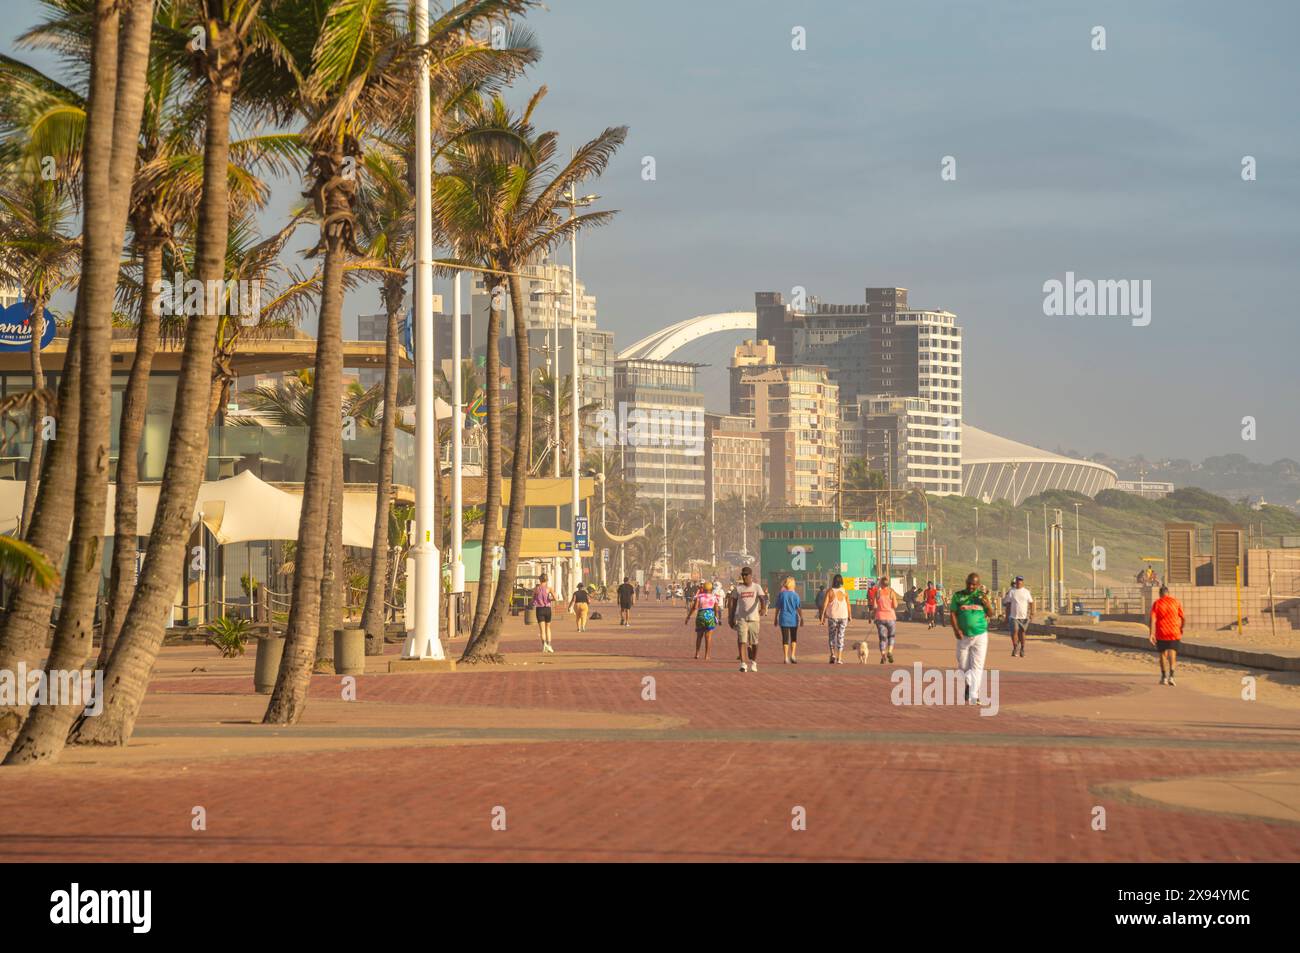 View of promenade and Moses Mabhida Stadium in background, Durban, KwaZulu-Natal Province, South Africa, Africa Stock Photo